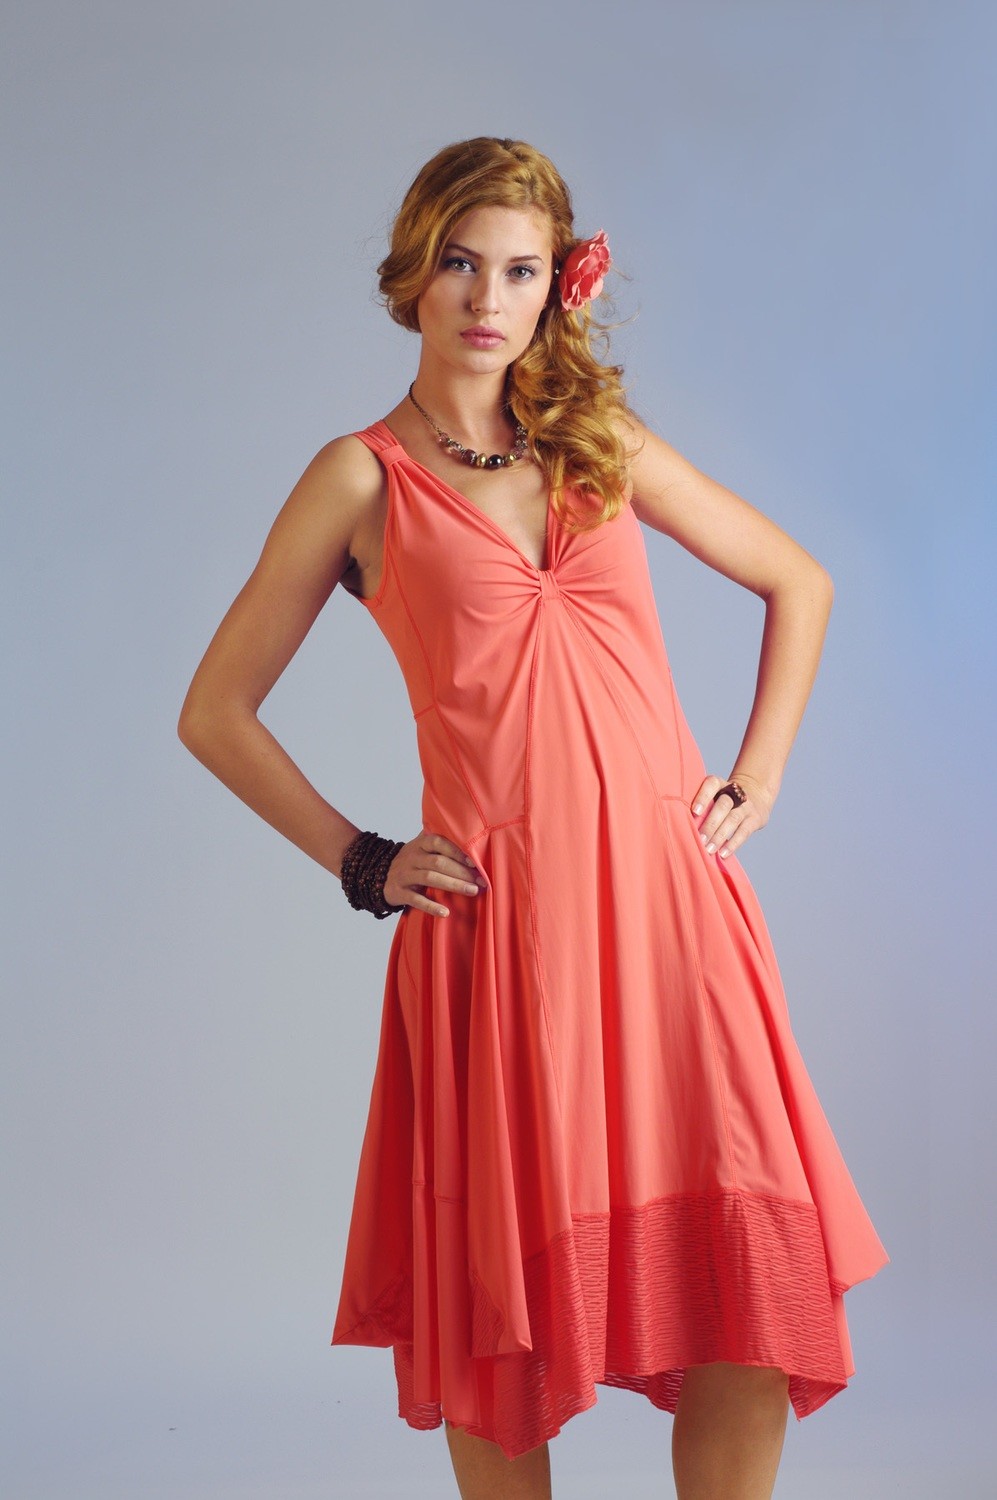 Maloka: Asymmetrical Bow Sundress, More Colors (Almost Gone!)